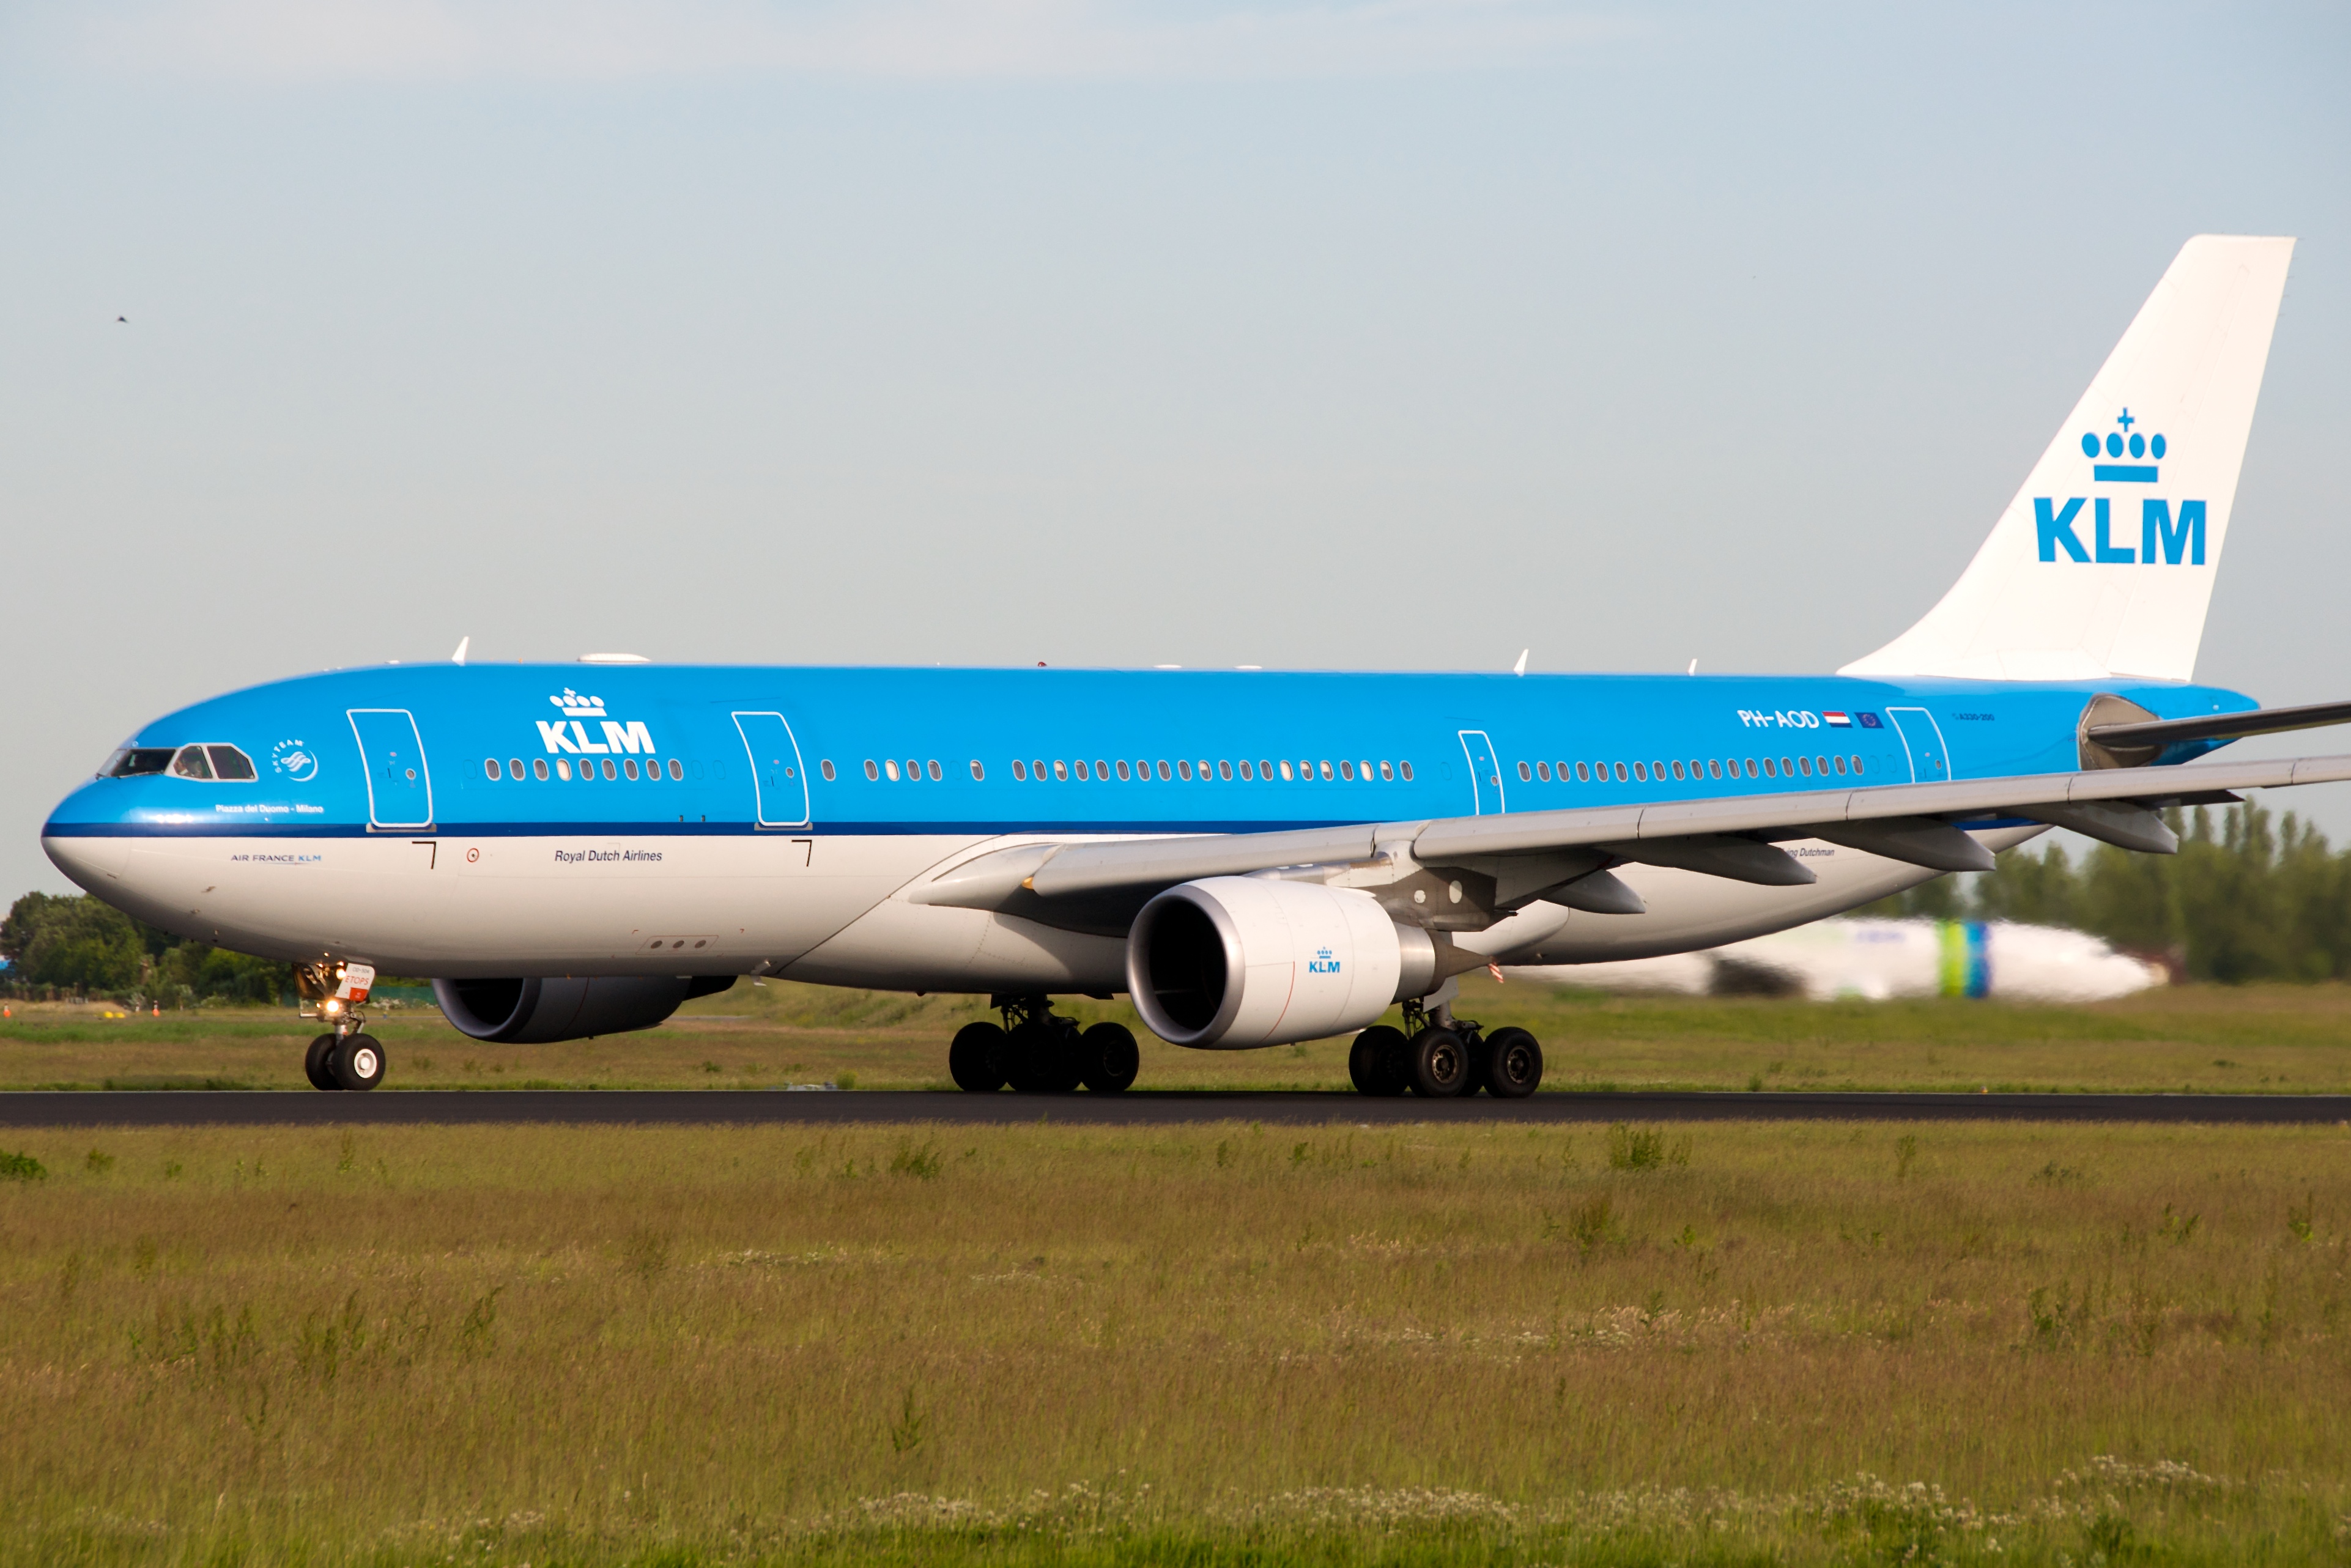 KLM allows Portable Electronic Devices starting today